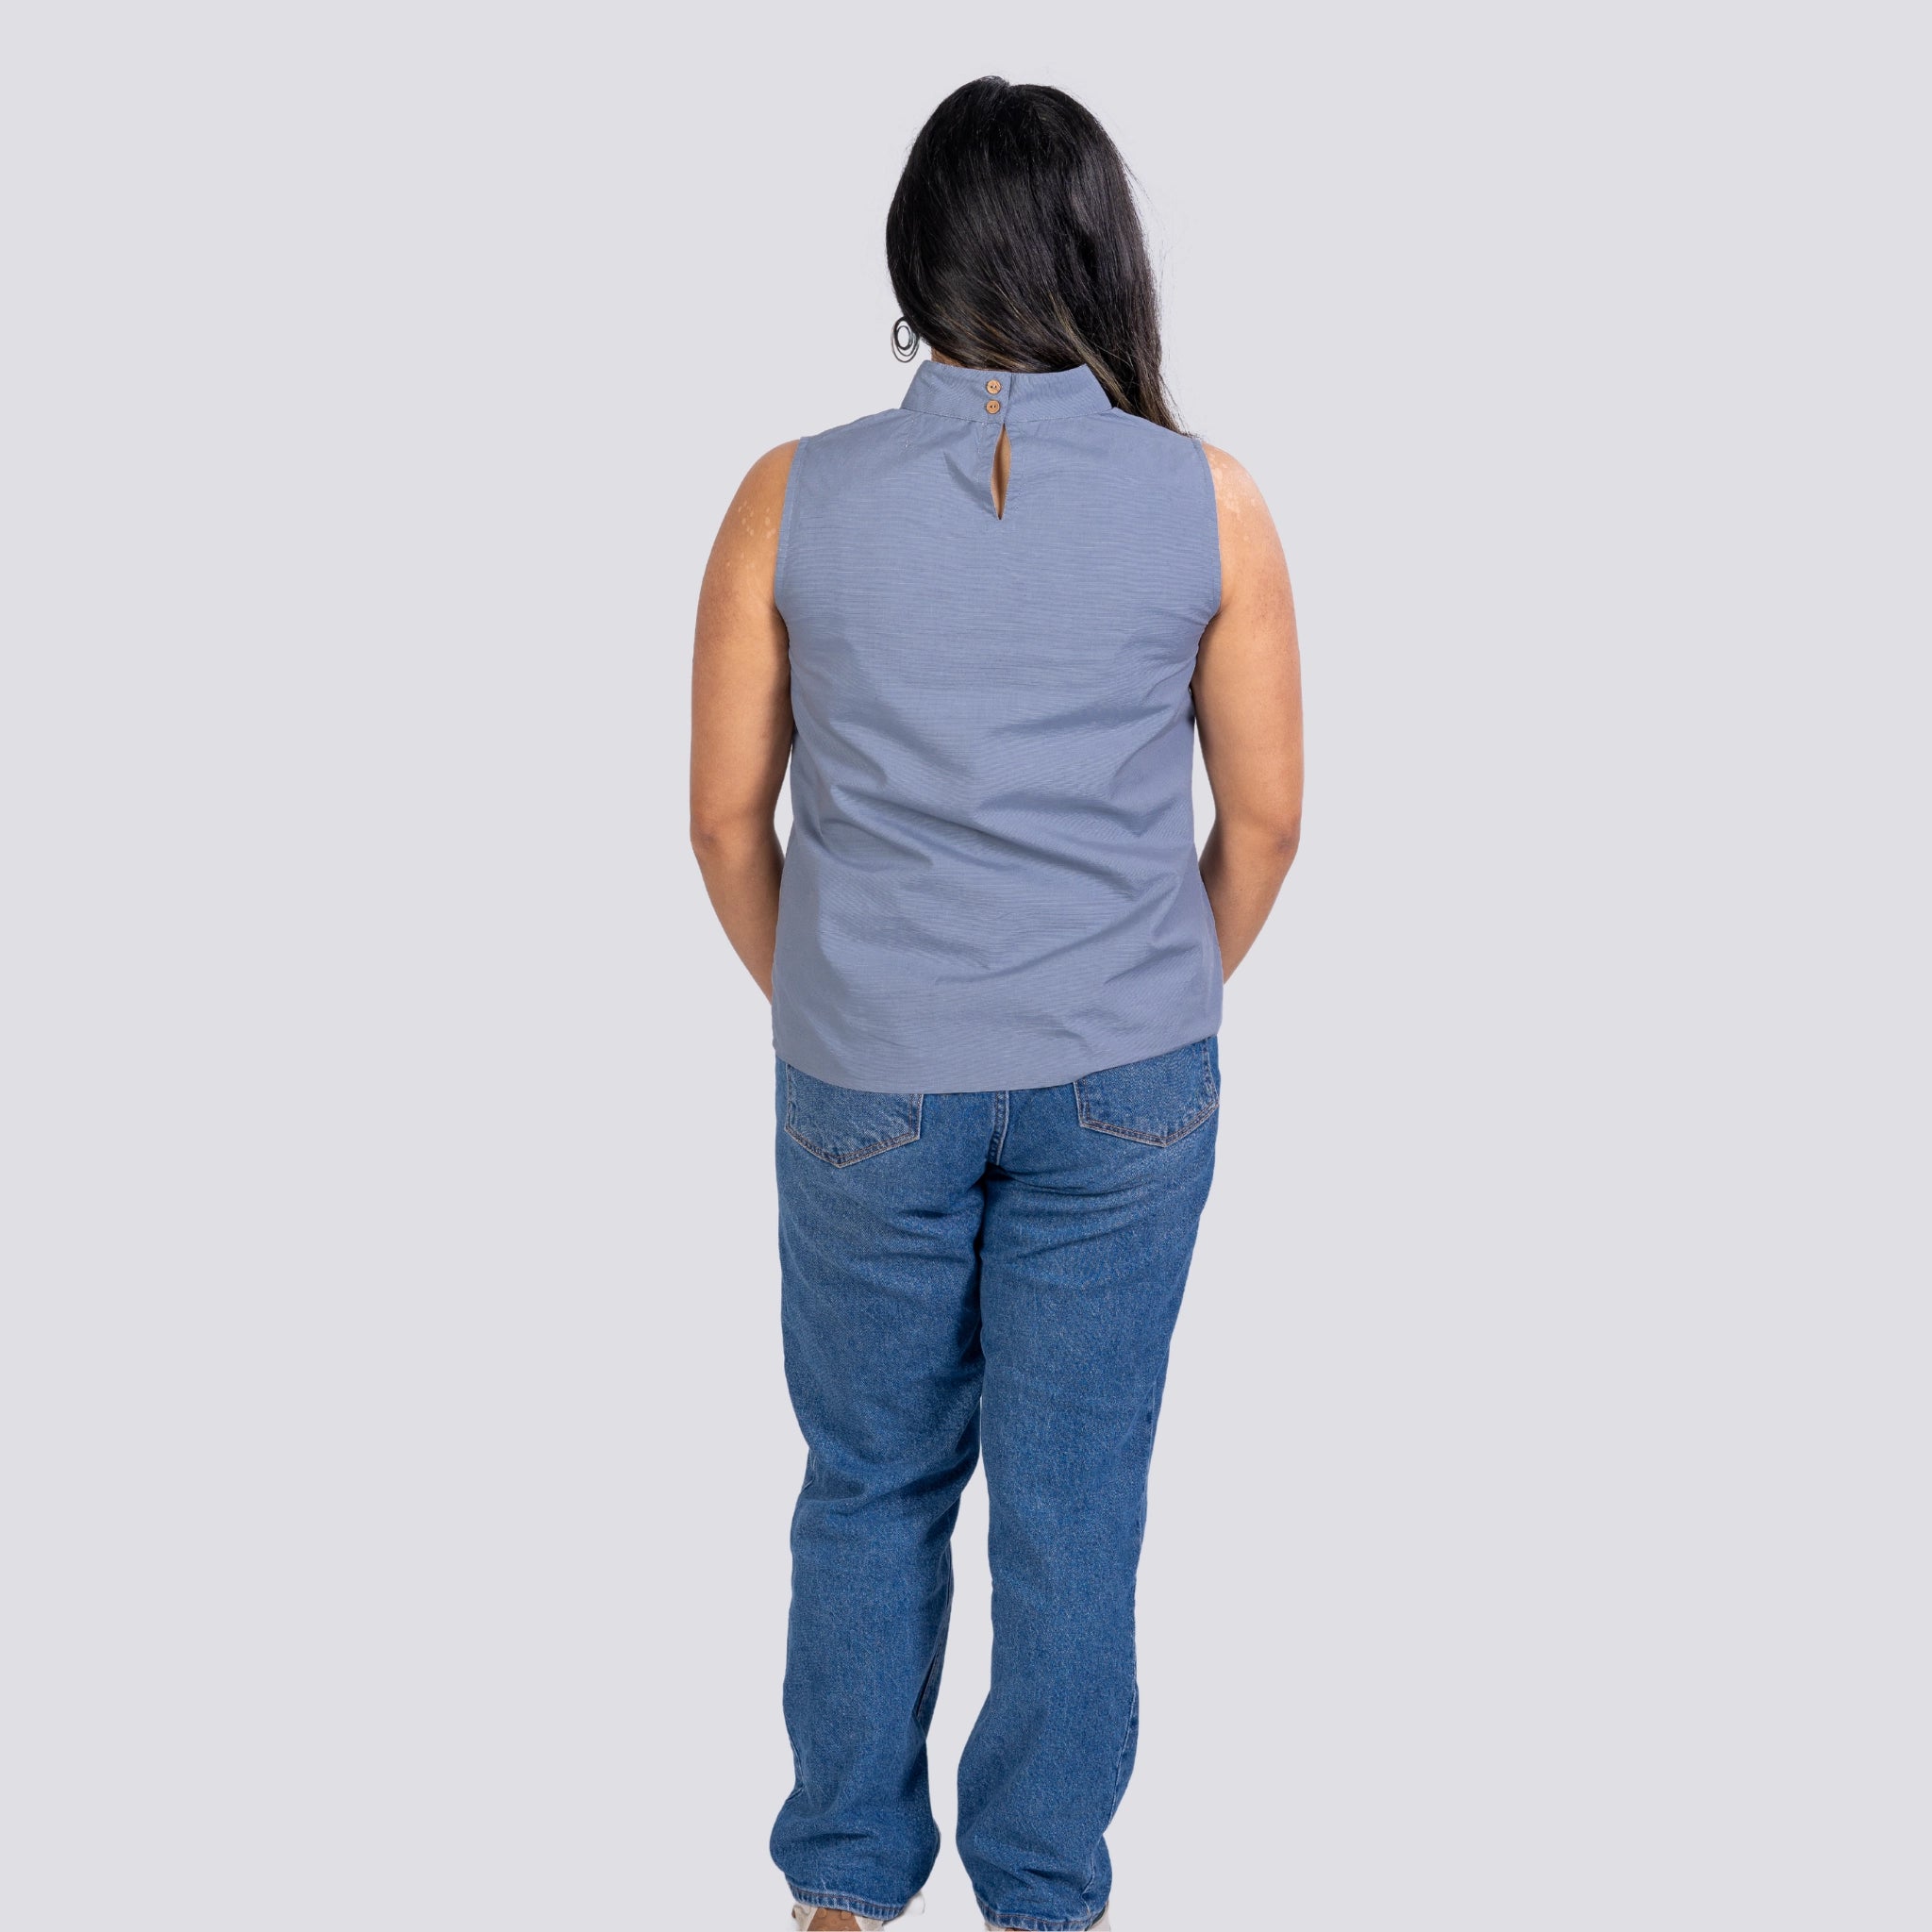 Woman standing with her back to the camera, wearing a sleeveless Karee Linen Top in Classic Grey and blue jeans, against a gray background.